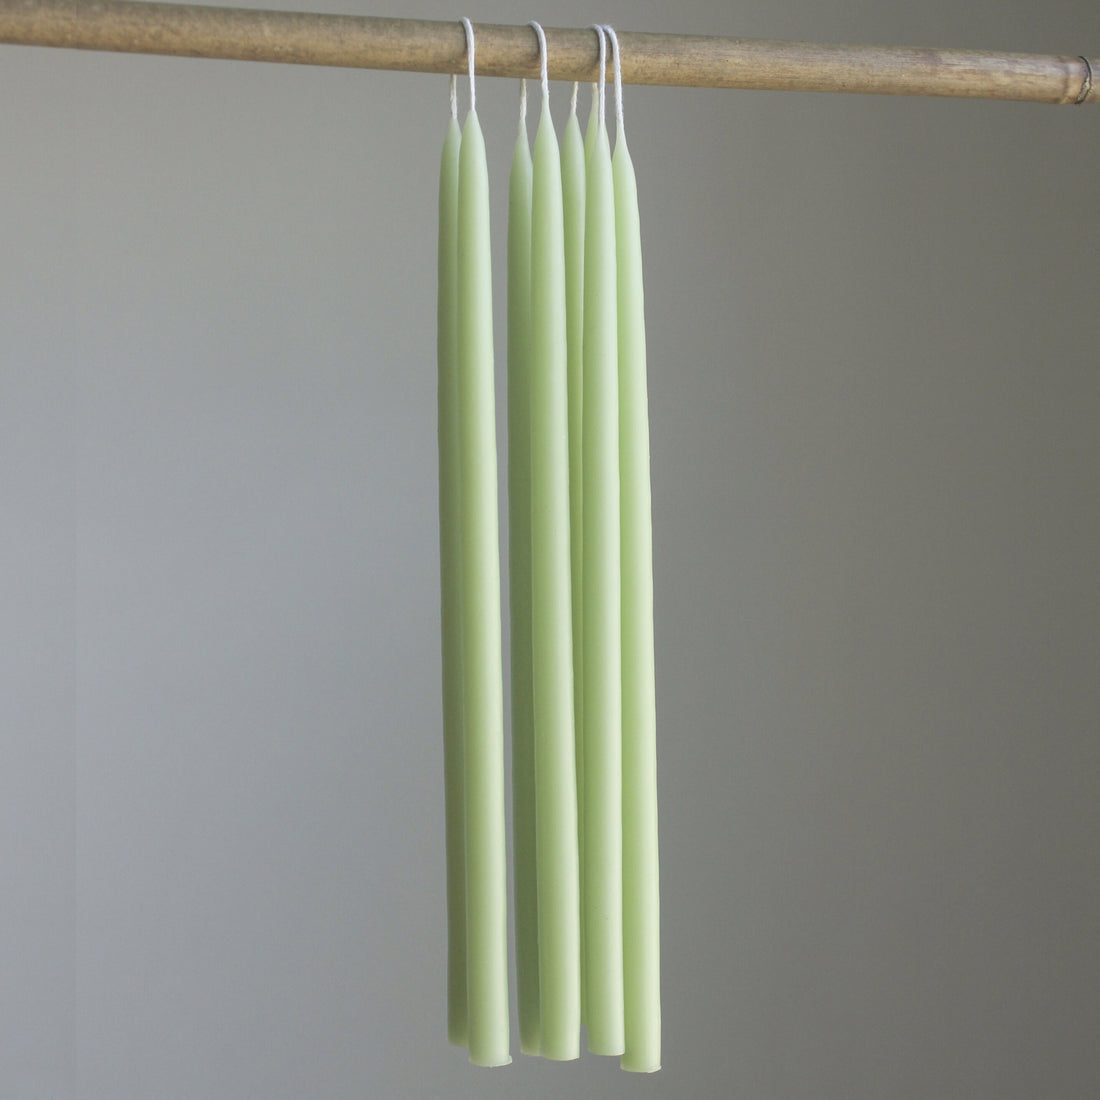 6 SLIM TAPERED BEESWAX CANDLES | PISTACHIO